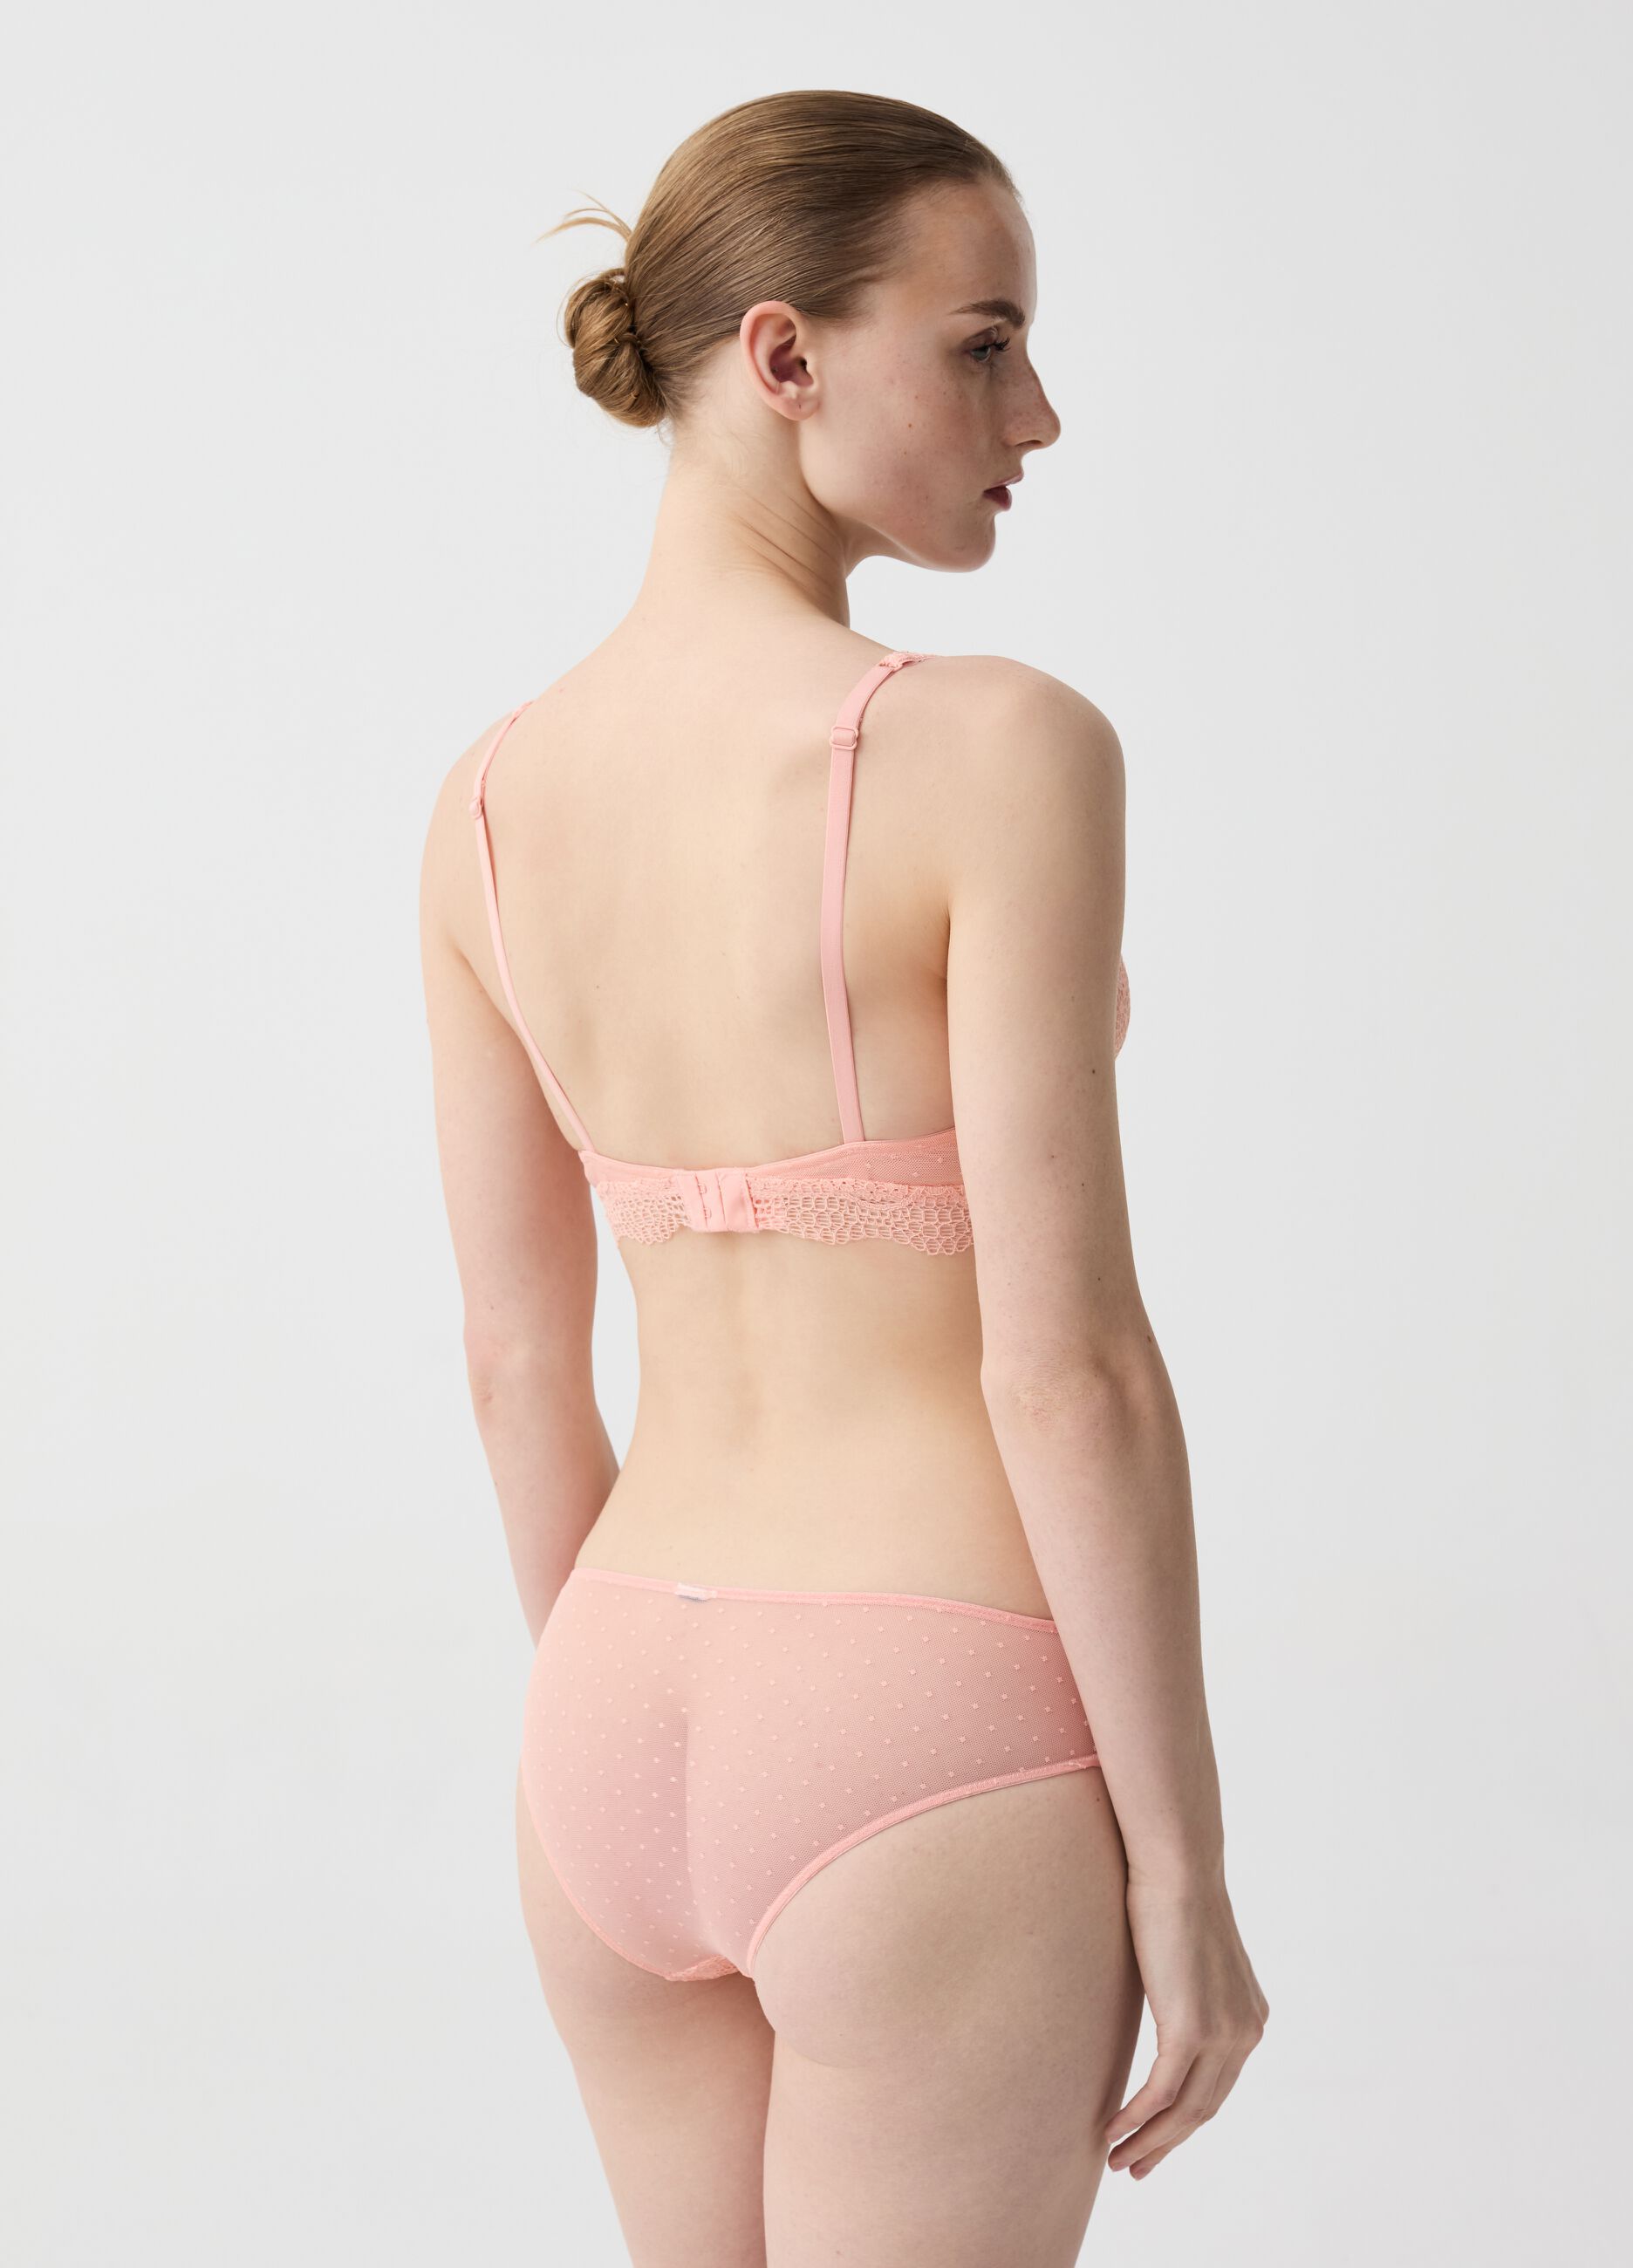 Floral lace briefs in plumetis tulle